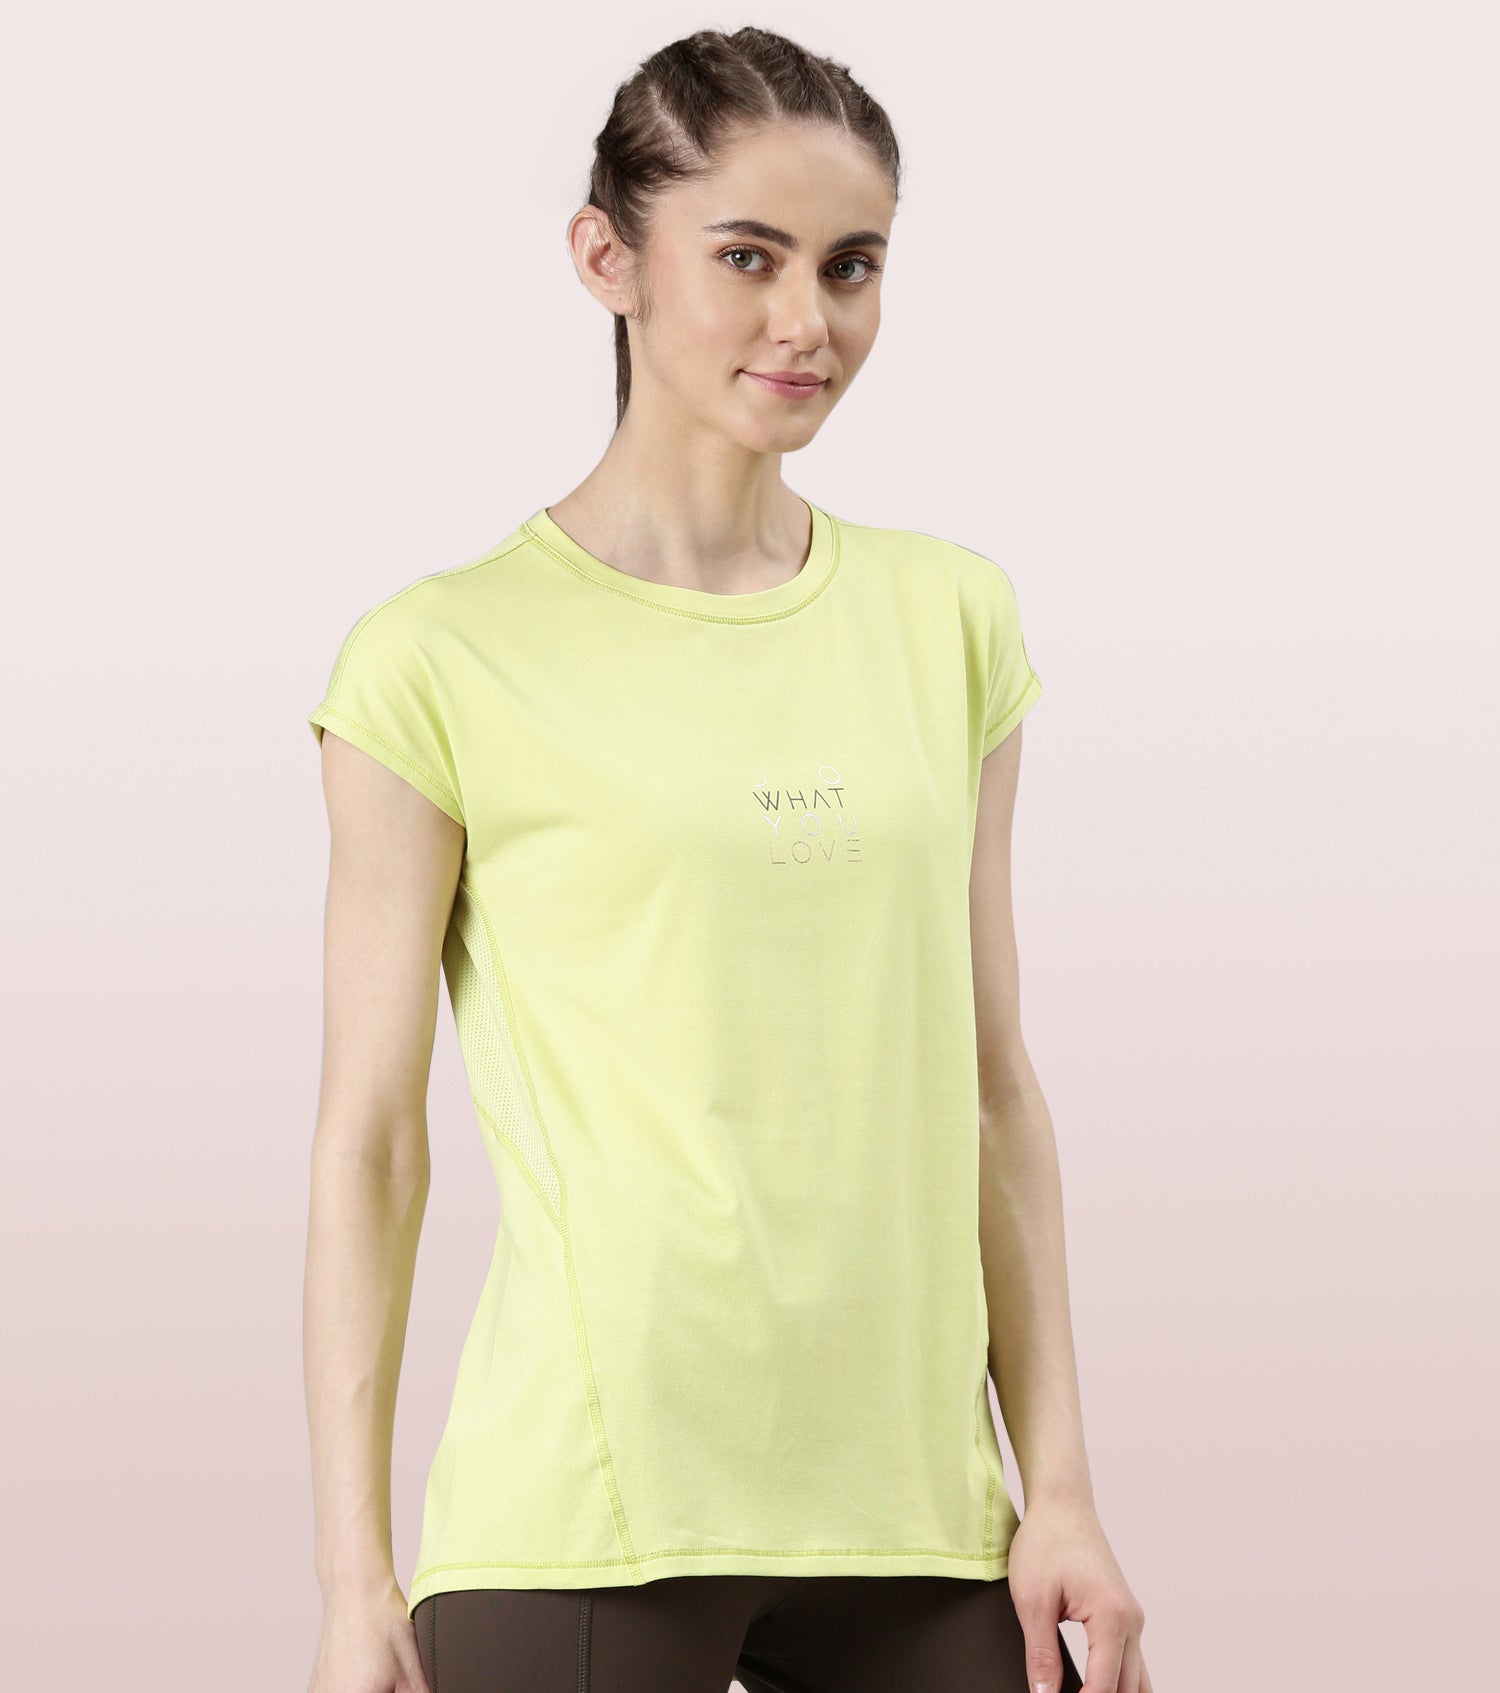 Active Stay Fresh Tee | Dry Fit Cotton Spandex Workout Tee